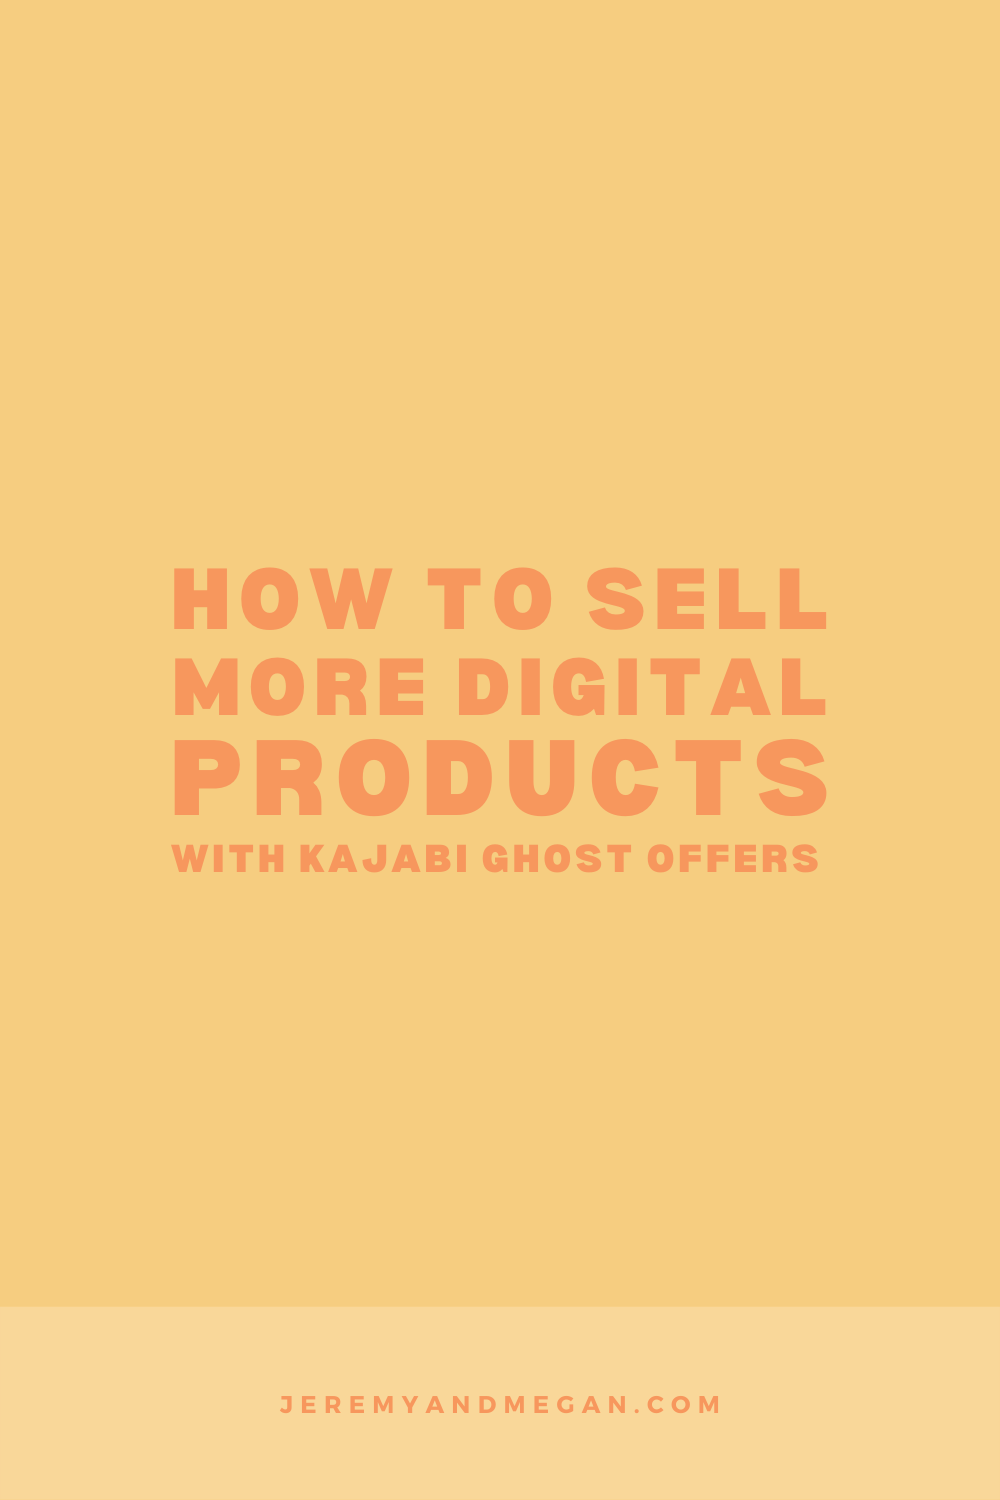 How to sell more digital products with Kajabi Ghost Offers: tips to sell your products online without paying more money